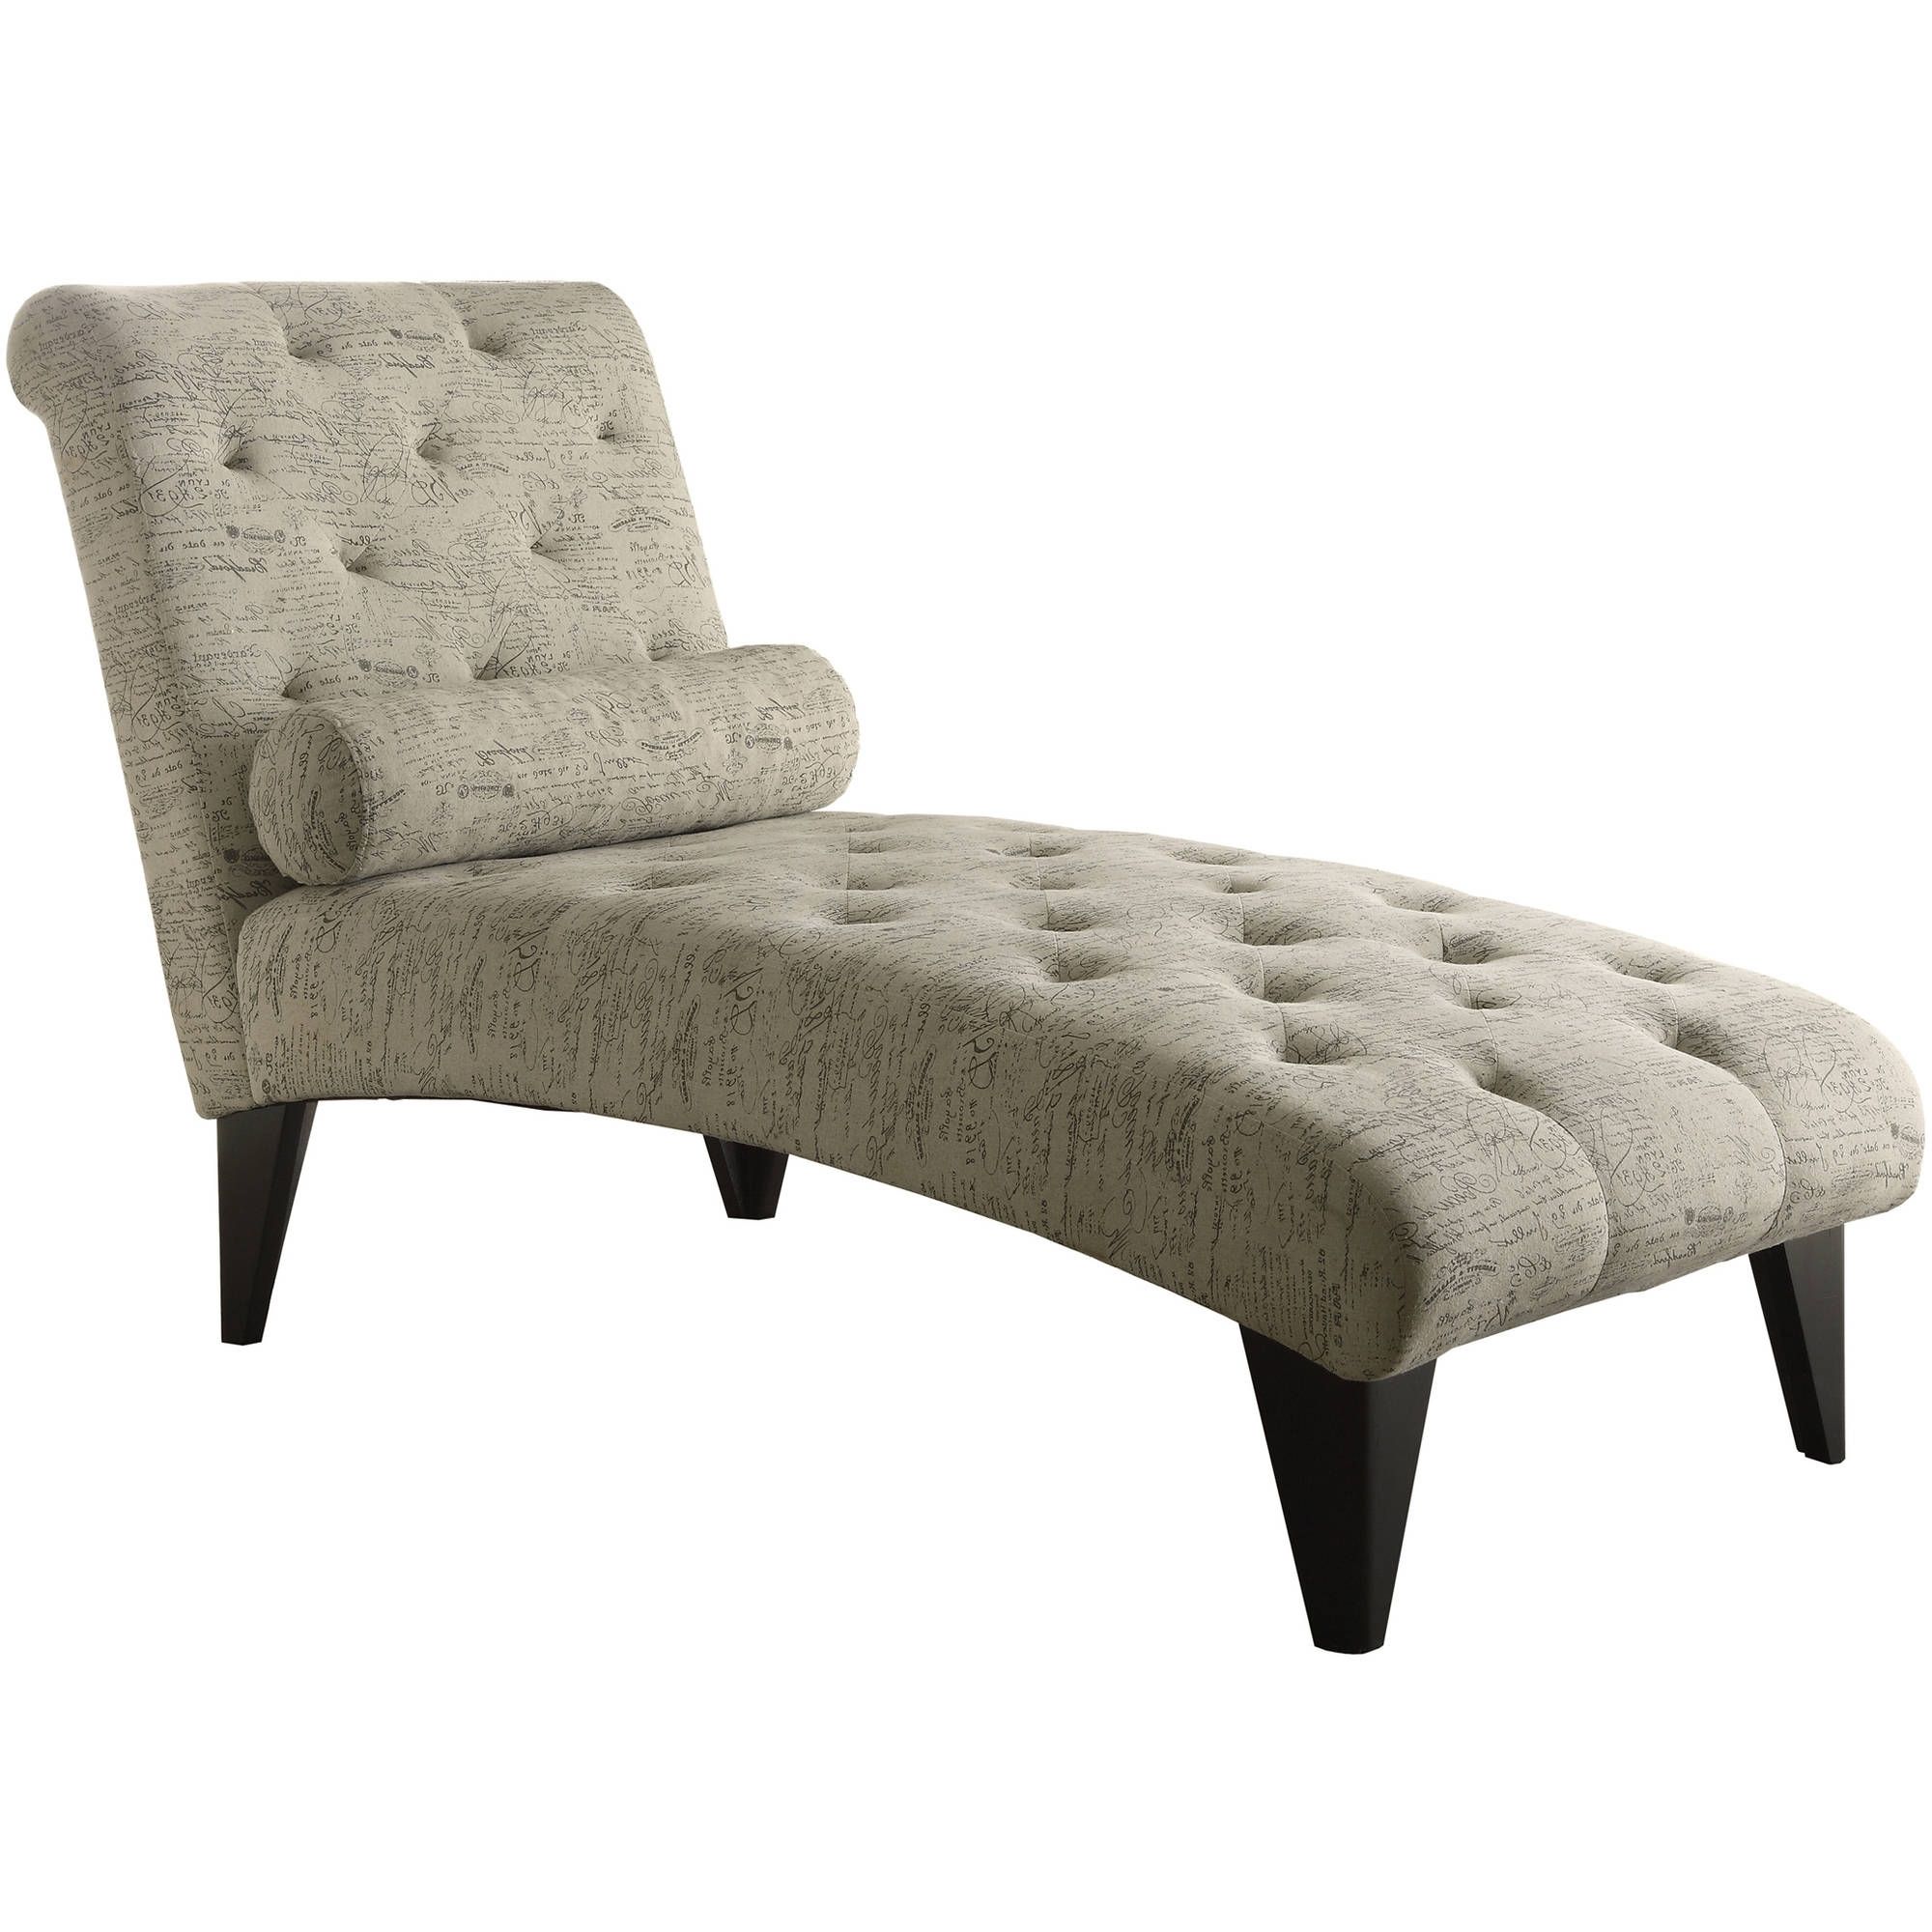 Preferred Chaise Lounges – Walmart With Regard To Chaise Lounge Chairs Under $ (View 4 of 15)